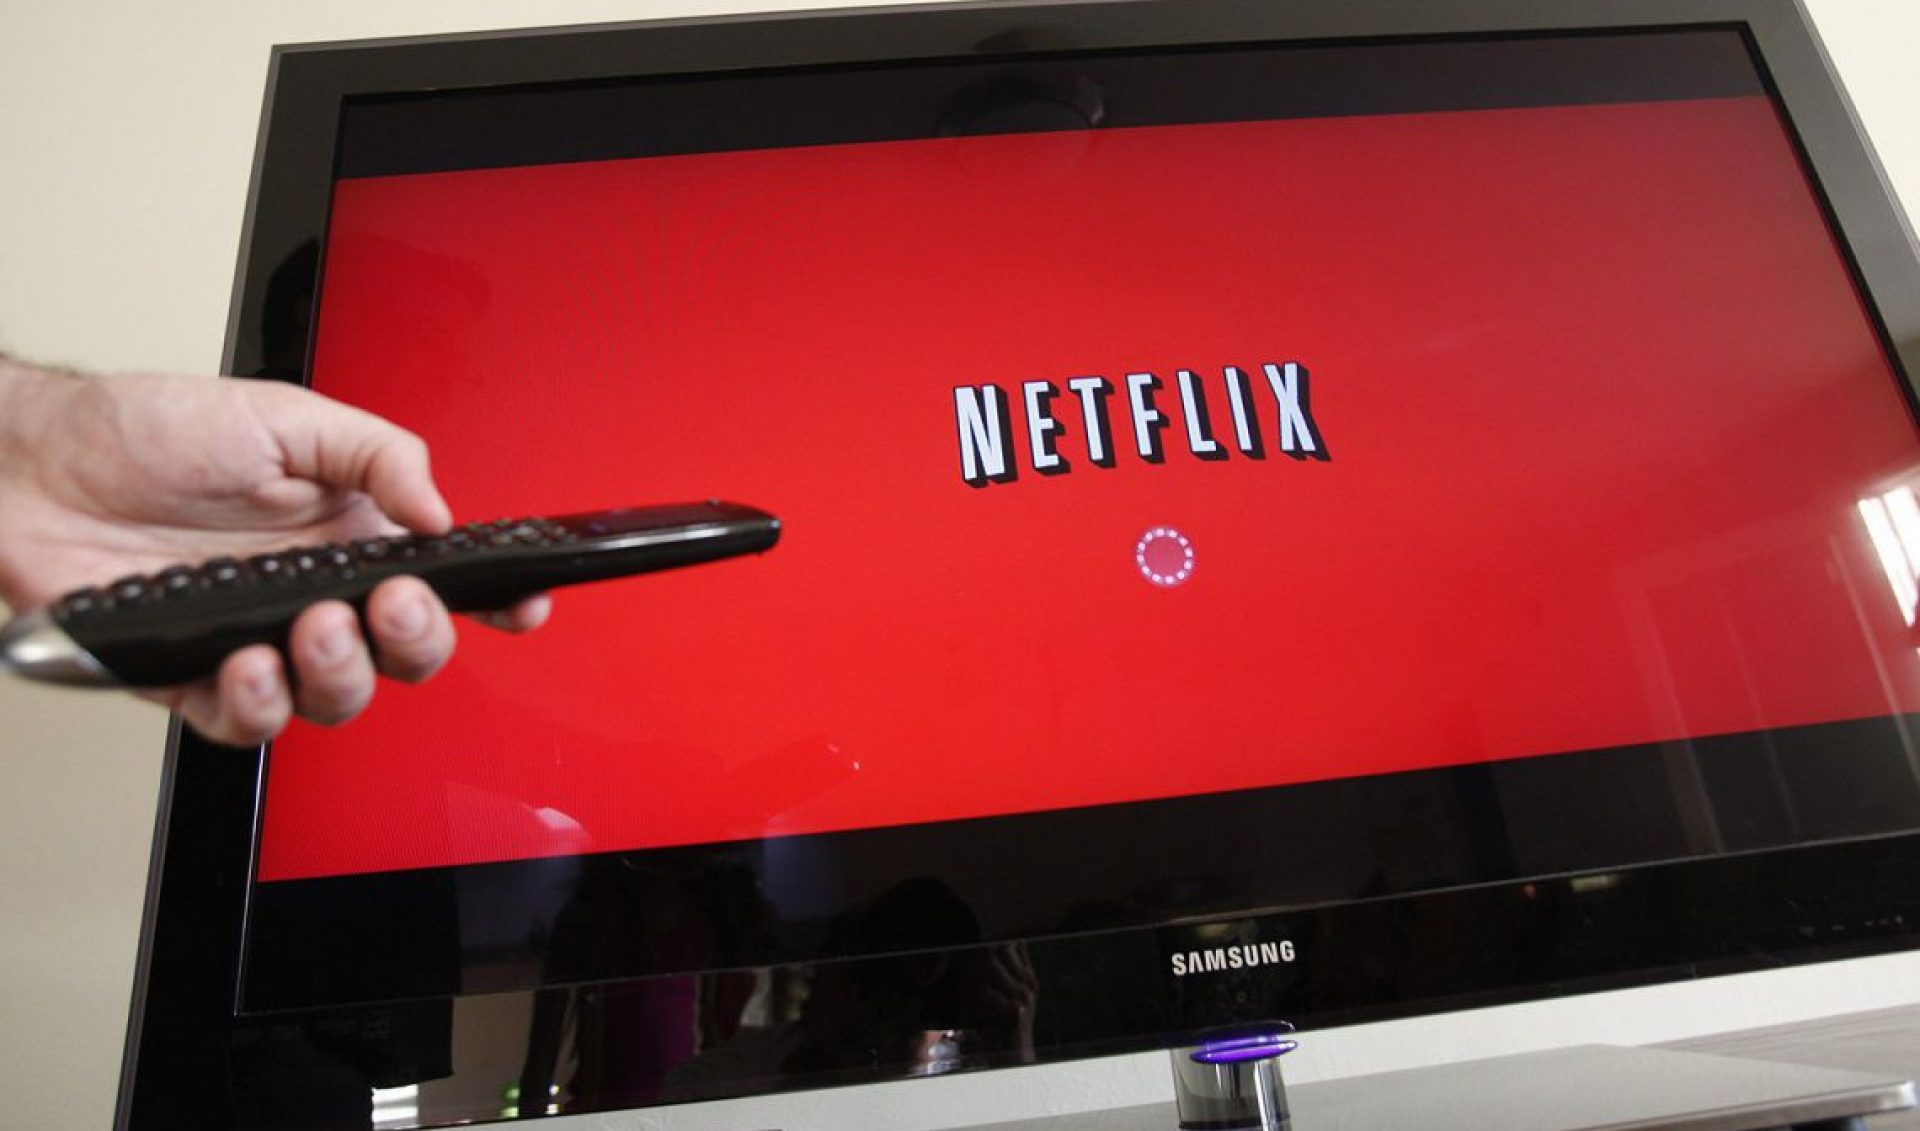 Netflix Expands Into 130 Countries, Barred From Countries Like China, North Korea (For Now)